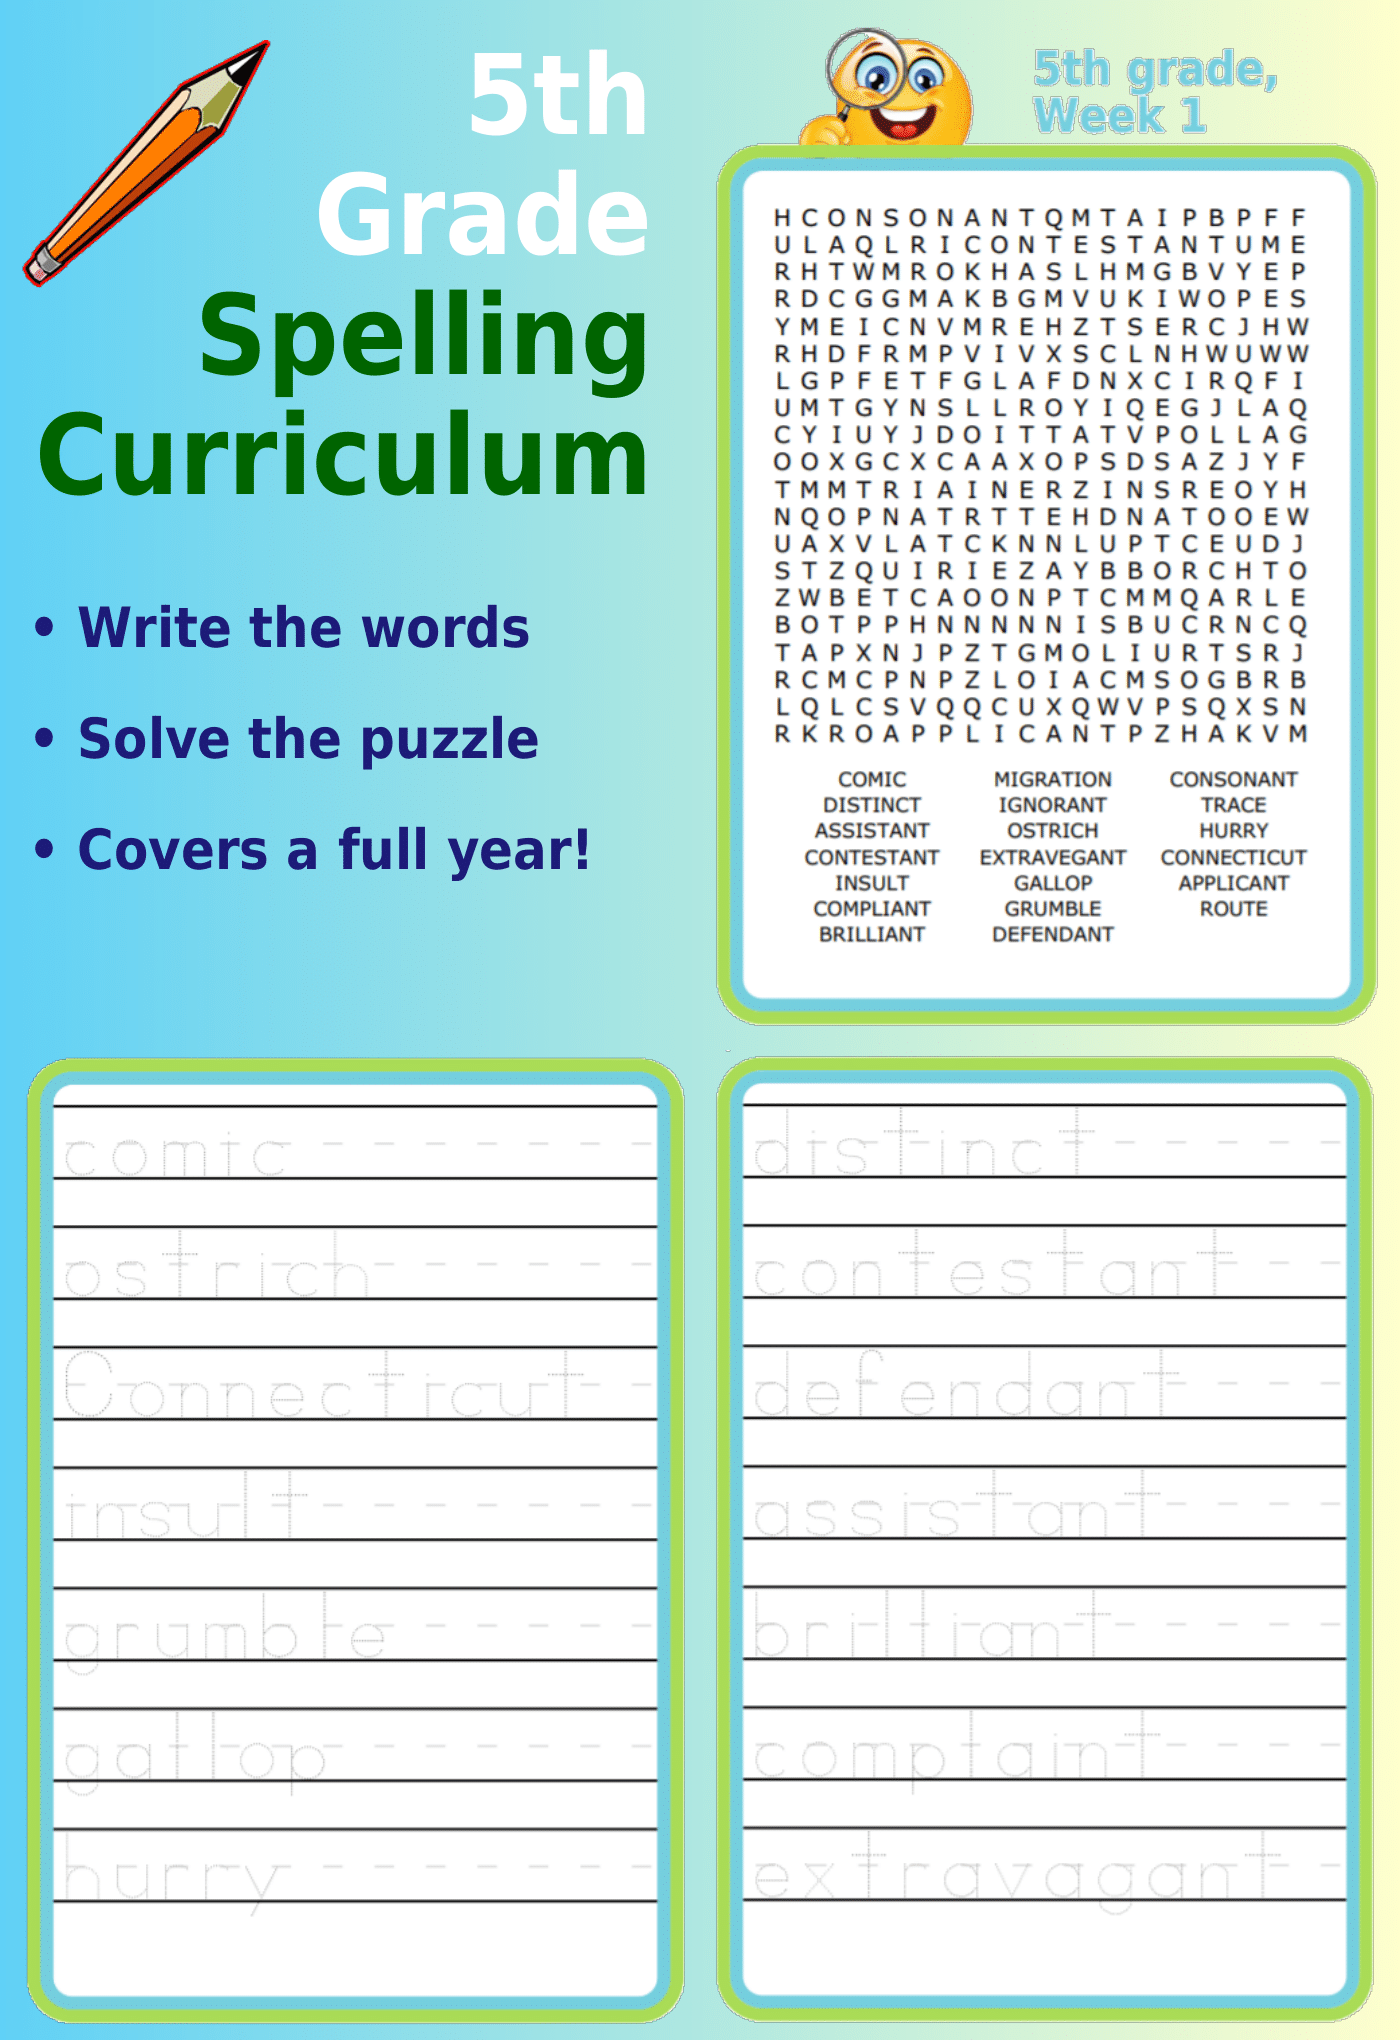 5th Grade Spelling Curriculum: Word search and letter tracing